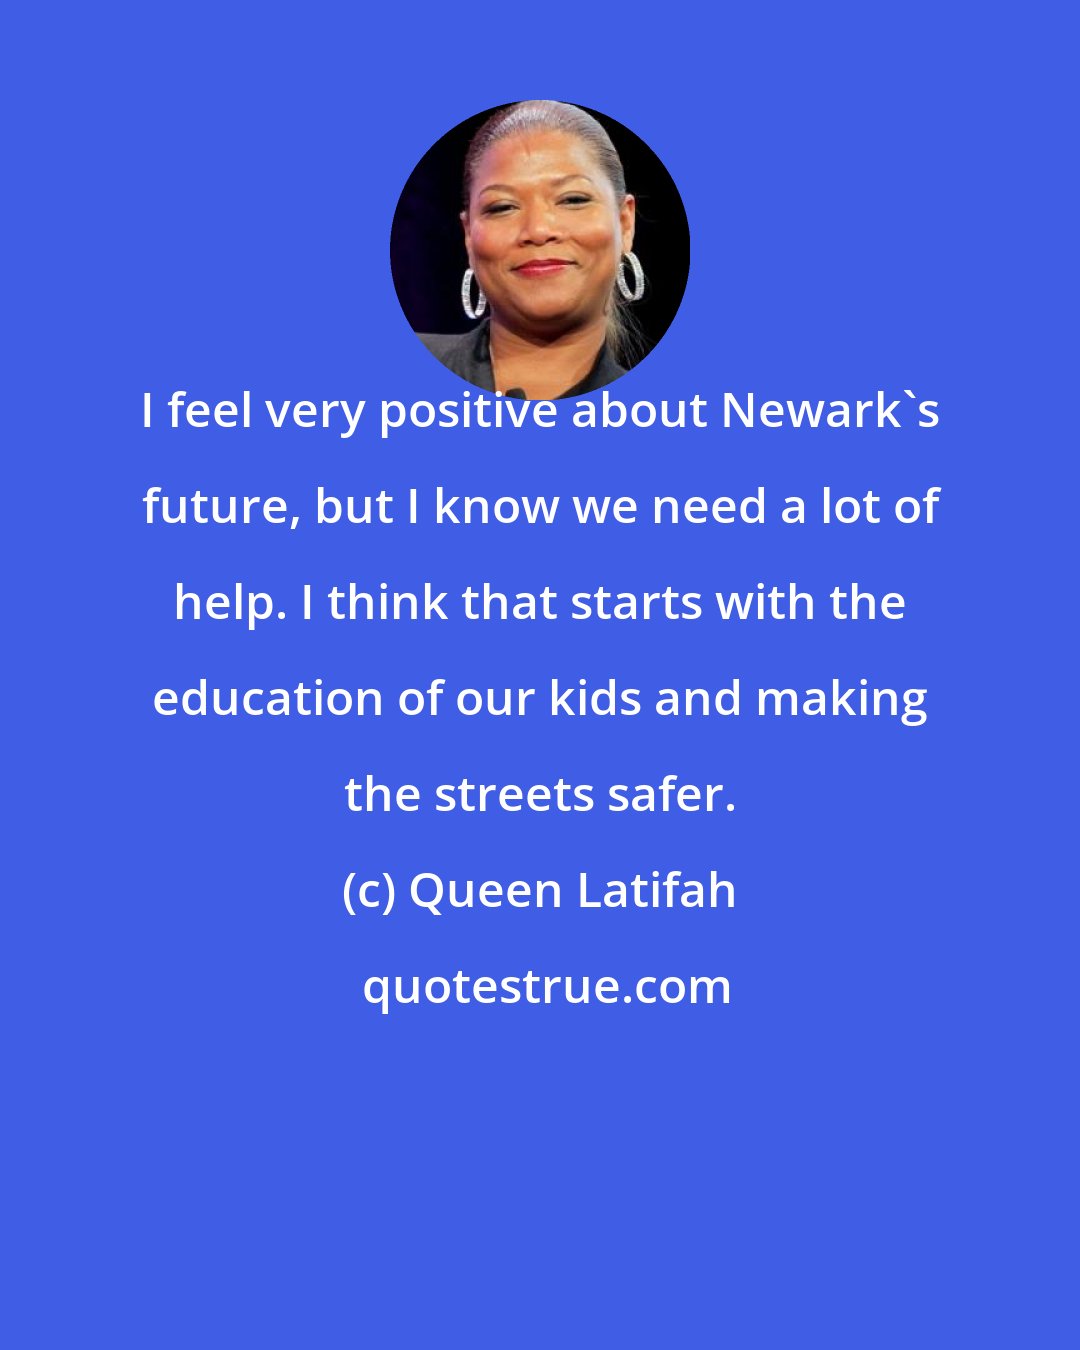 Queen Latifah: I feel very positive about Newark's future, but I know we need a lot of help. I think that starts with the education of our kids and making the streets safer.